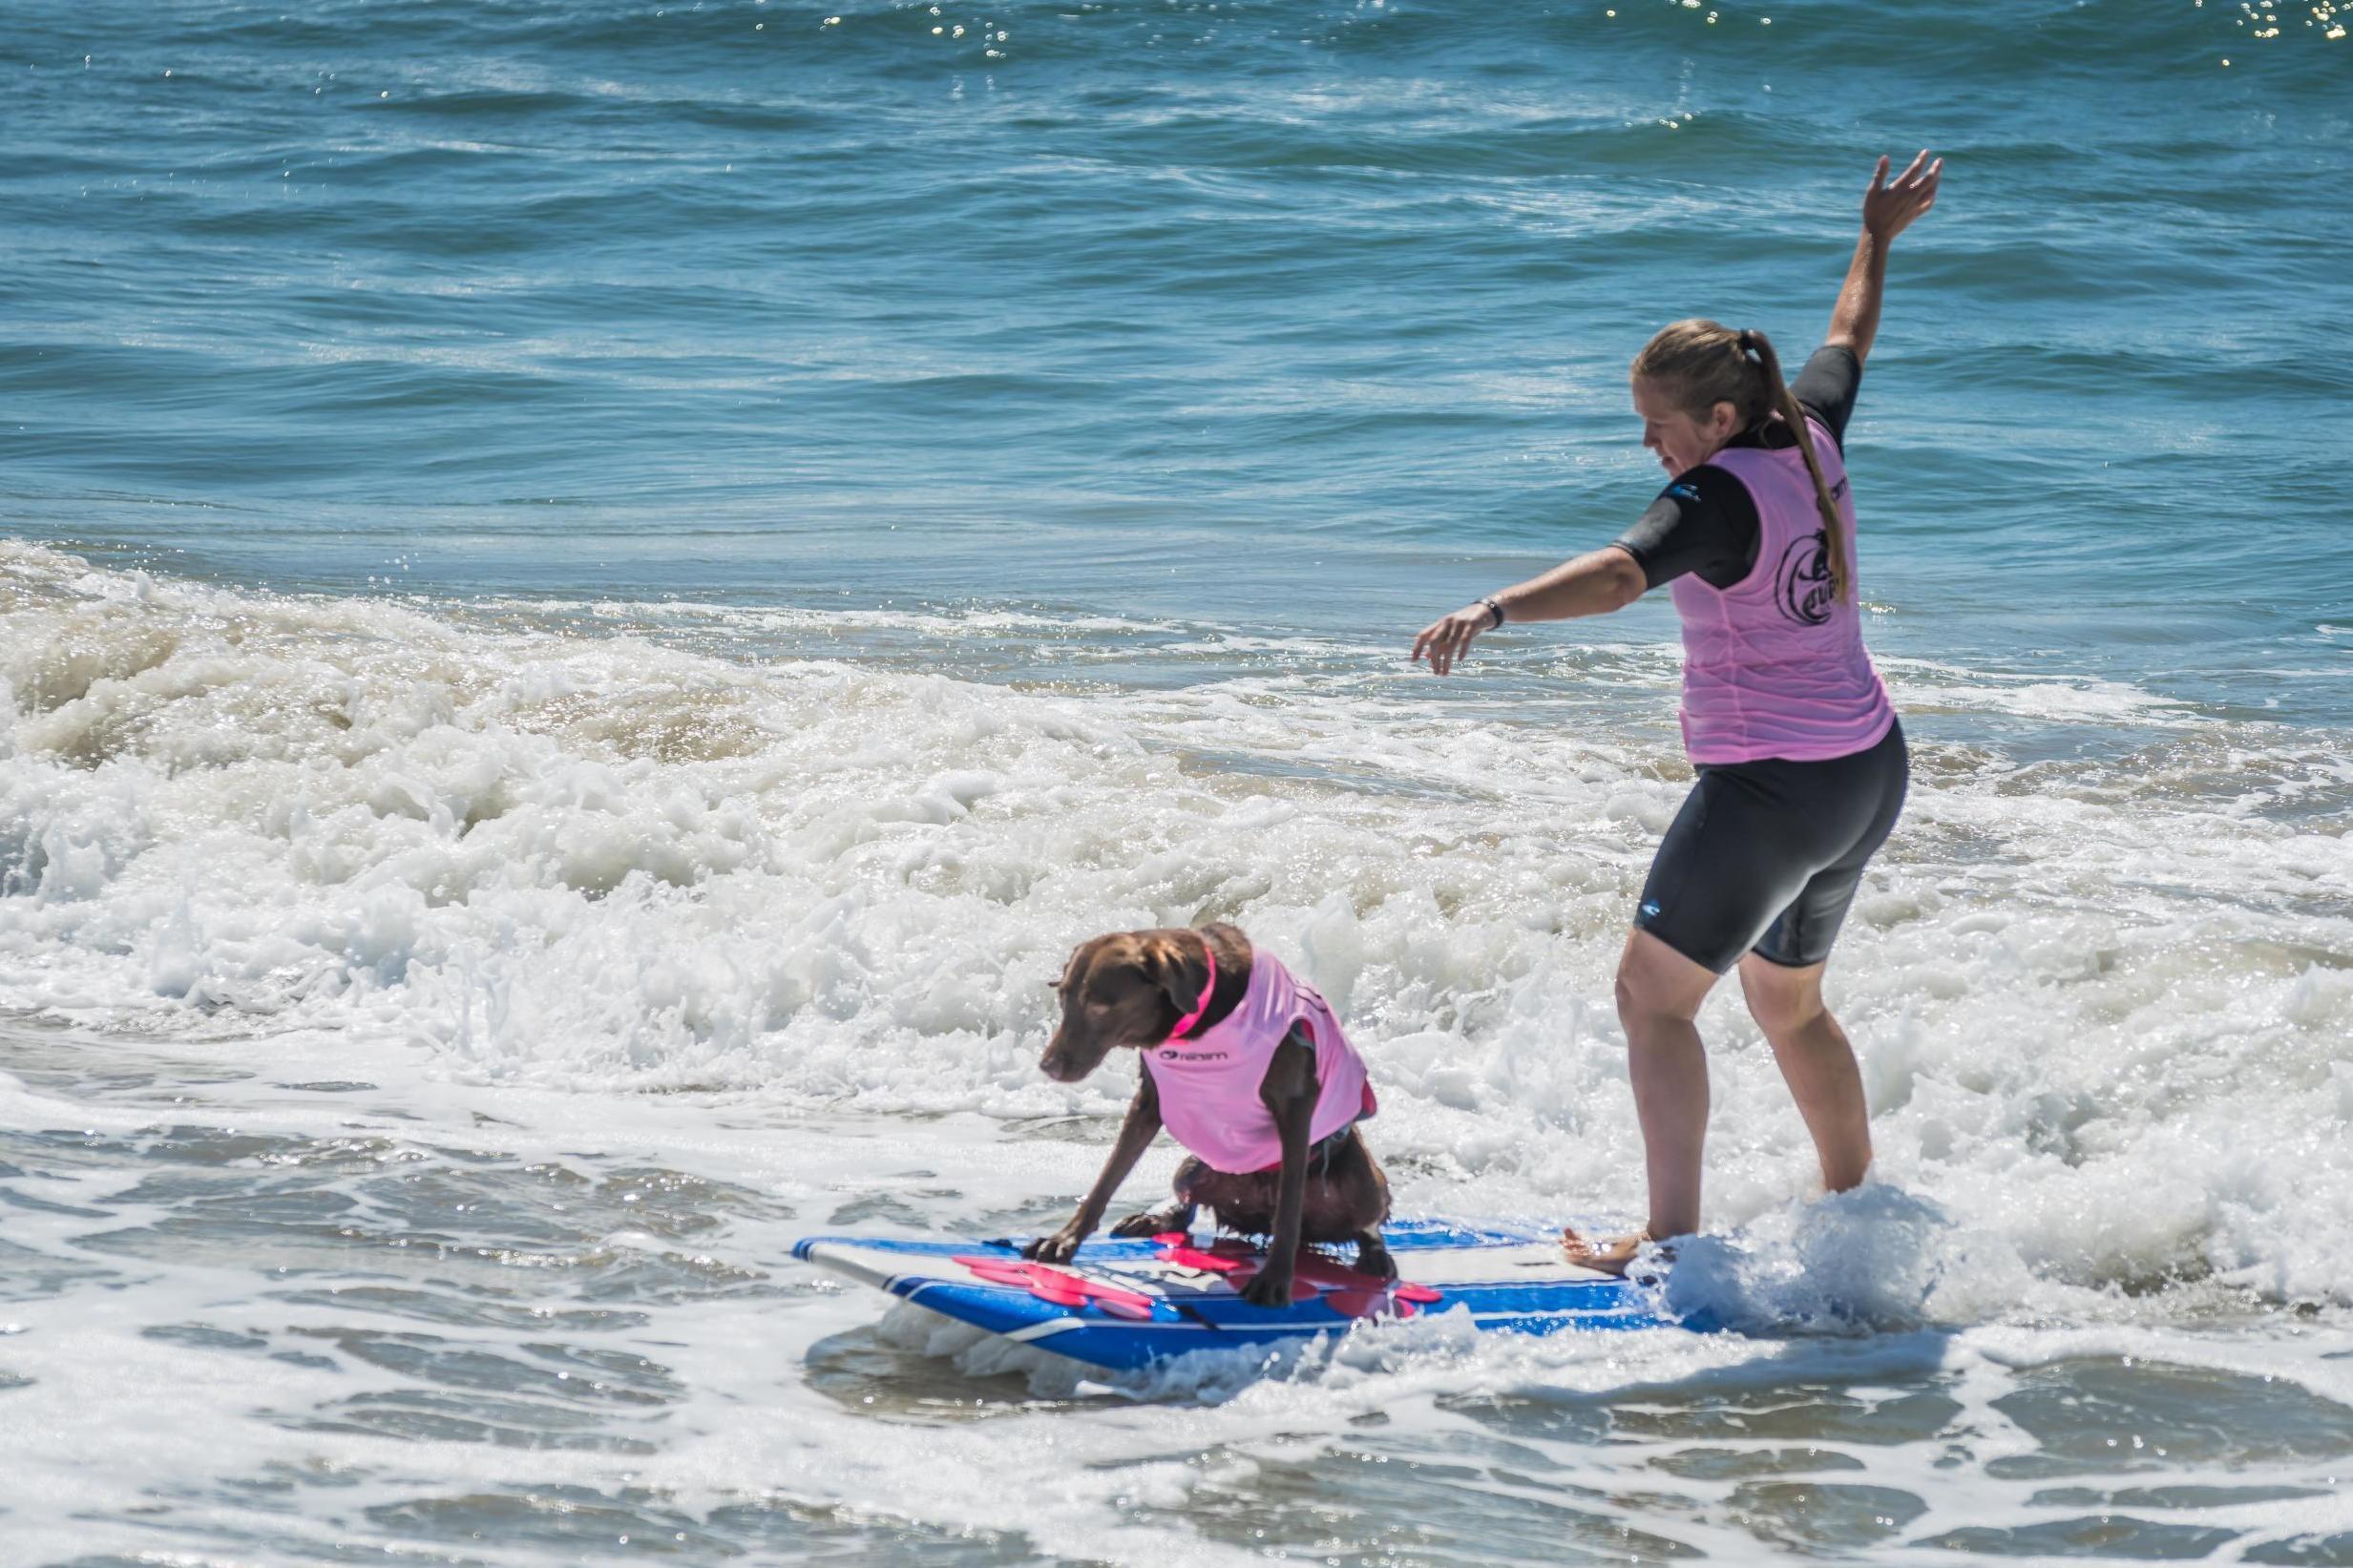 Dogs could surf alone, with another dog or with a human